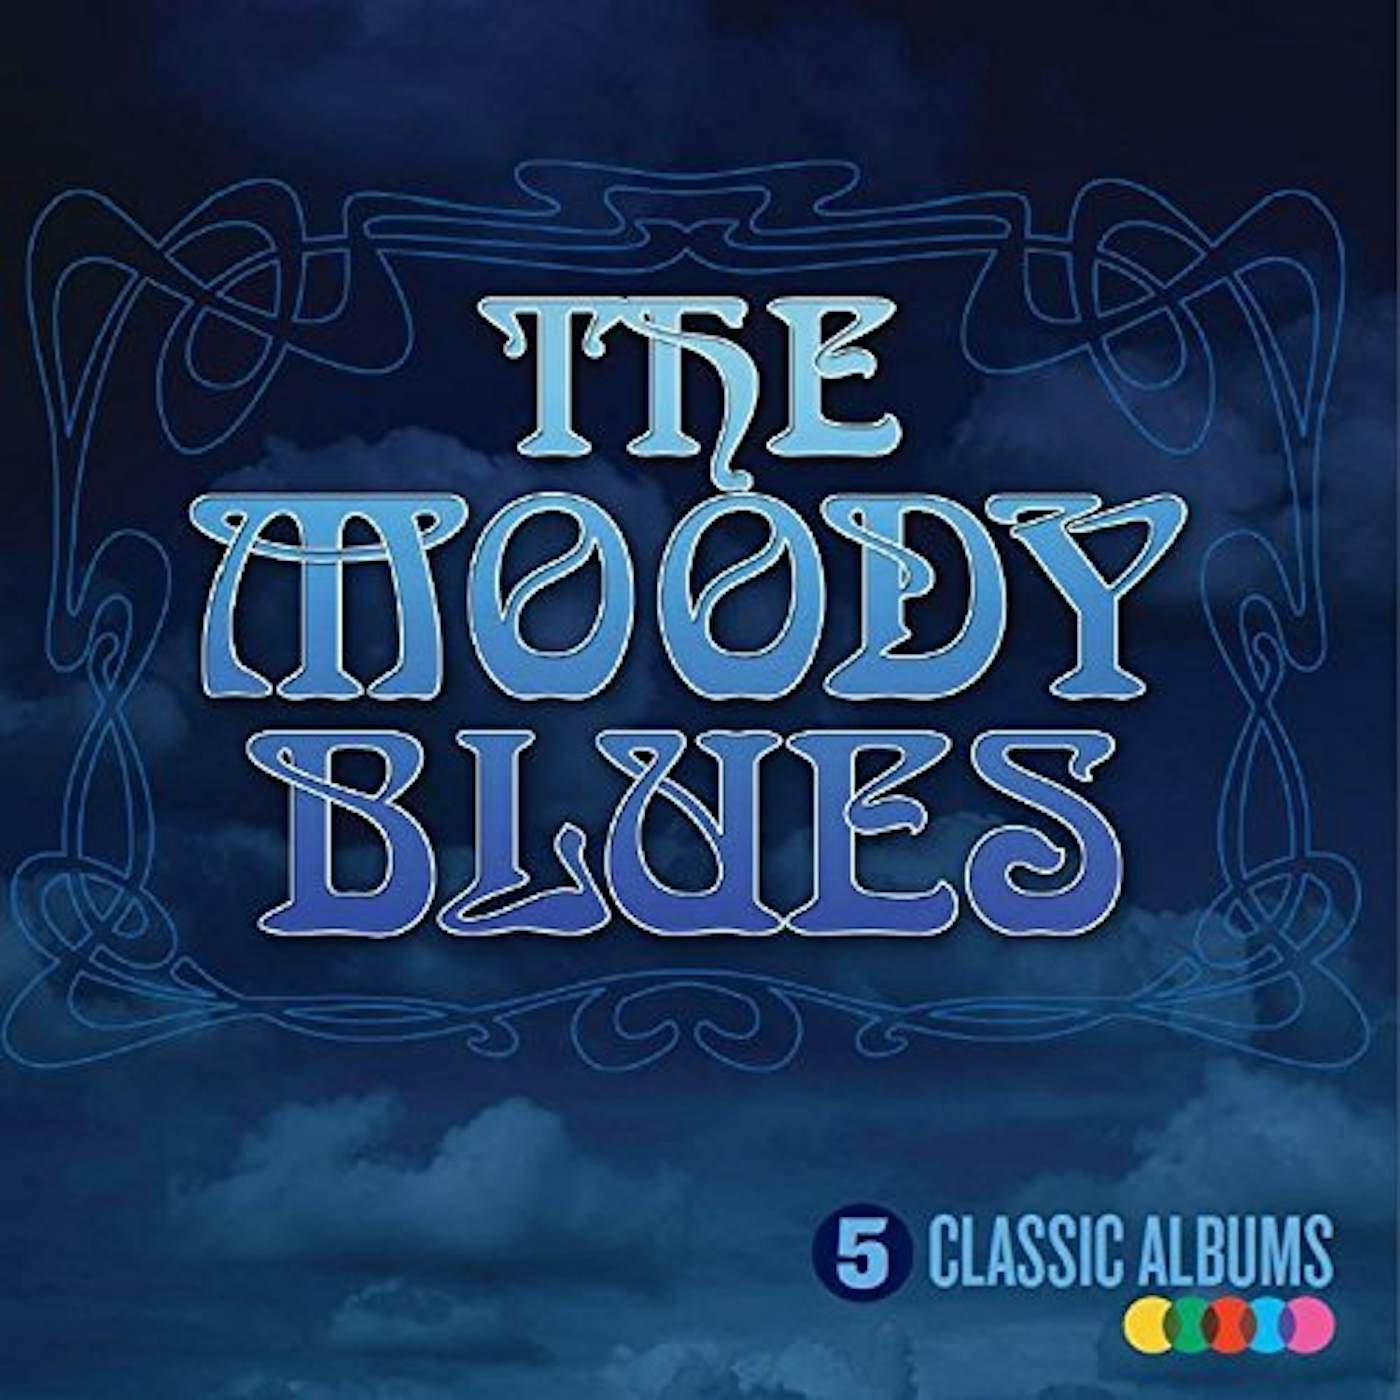 The Moody Blues 5 CLASSIC ALBUMS CD